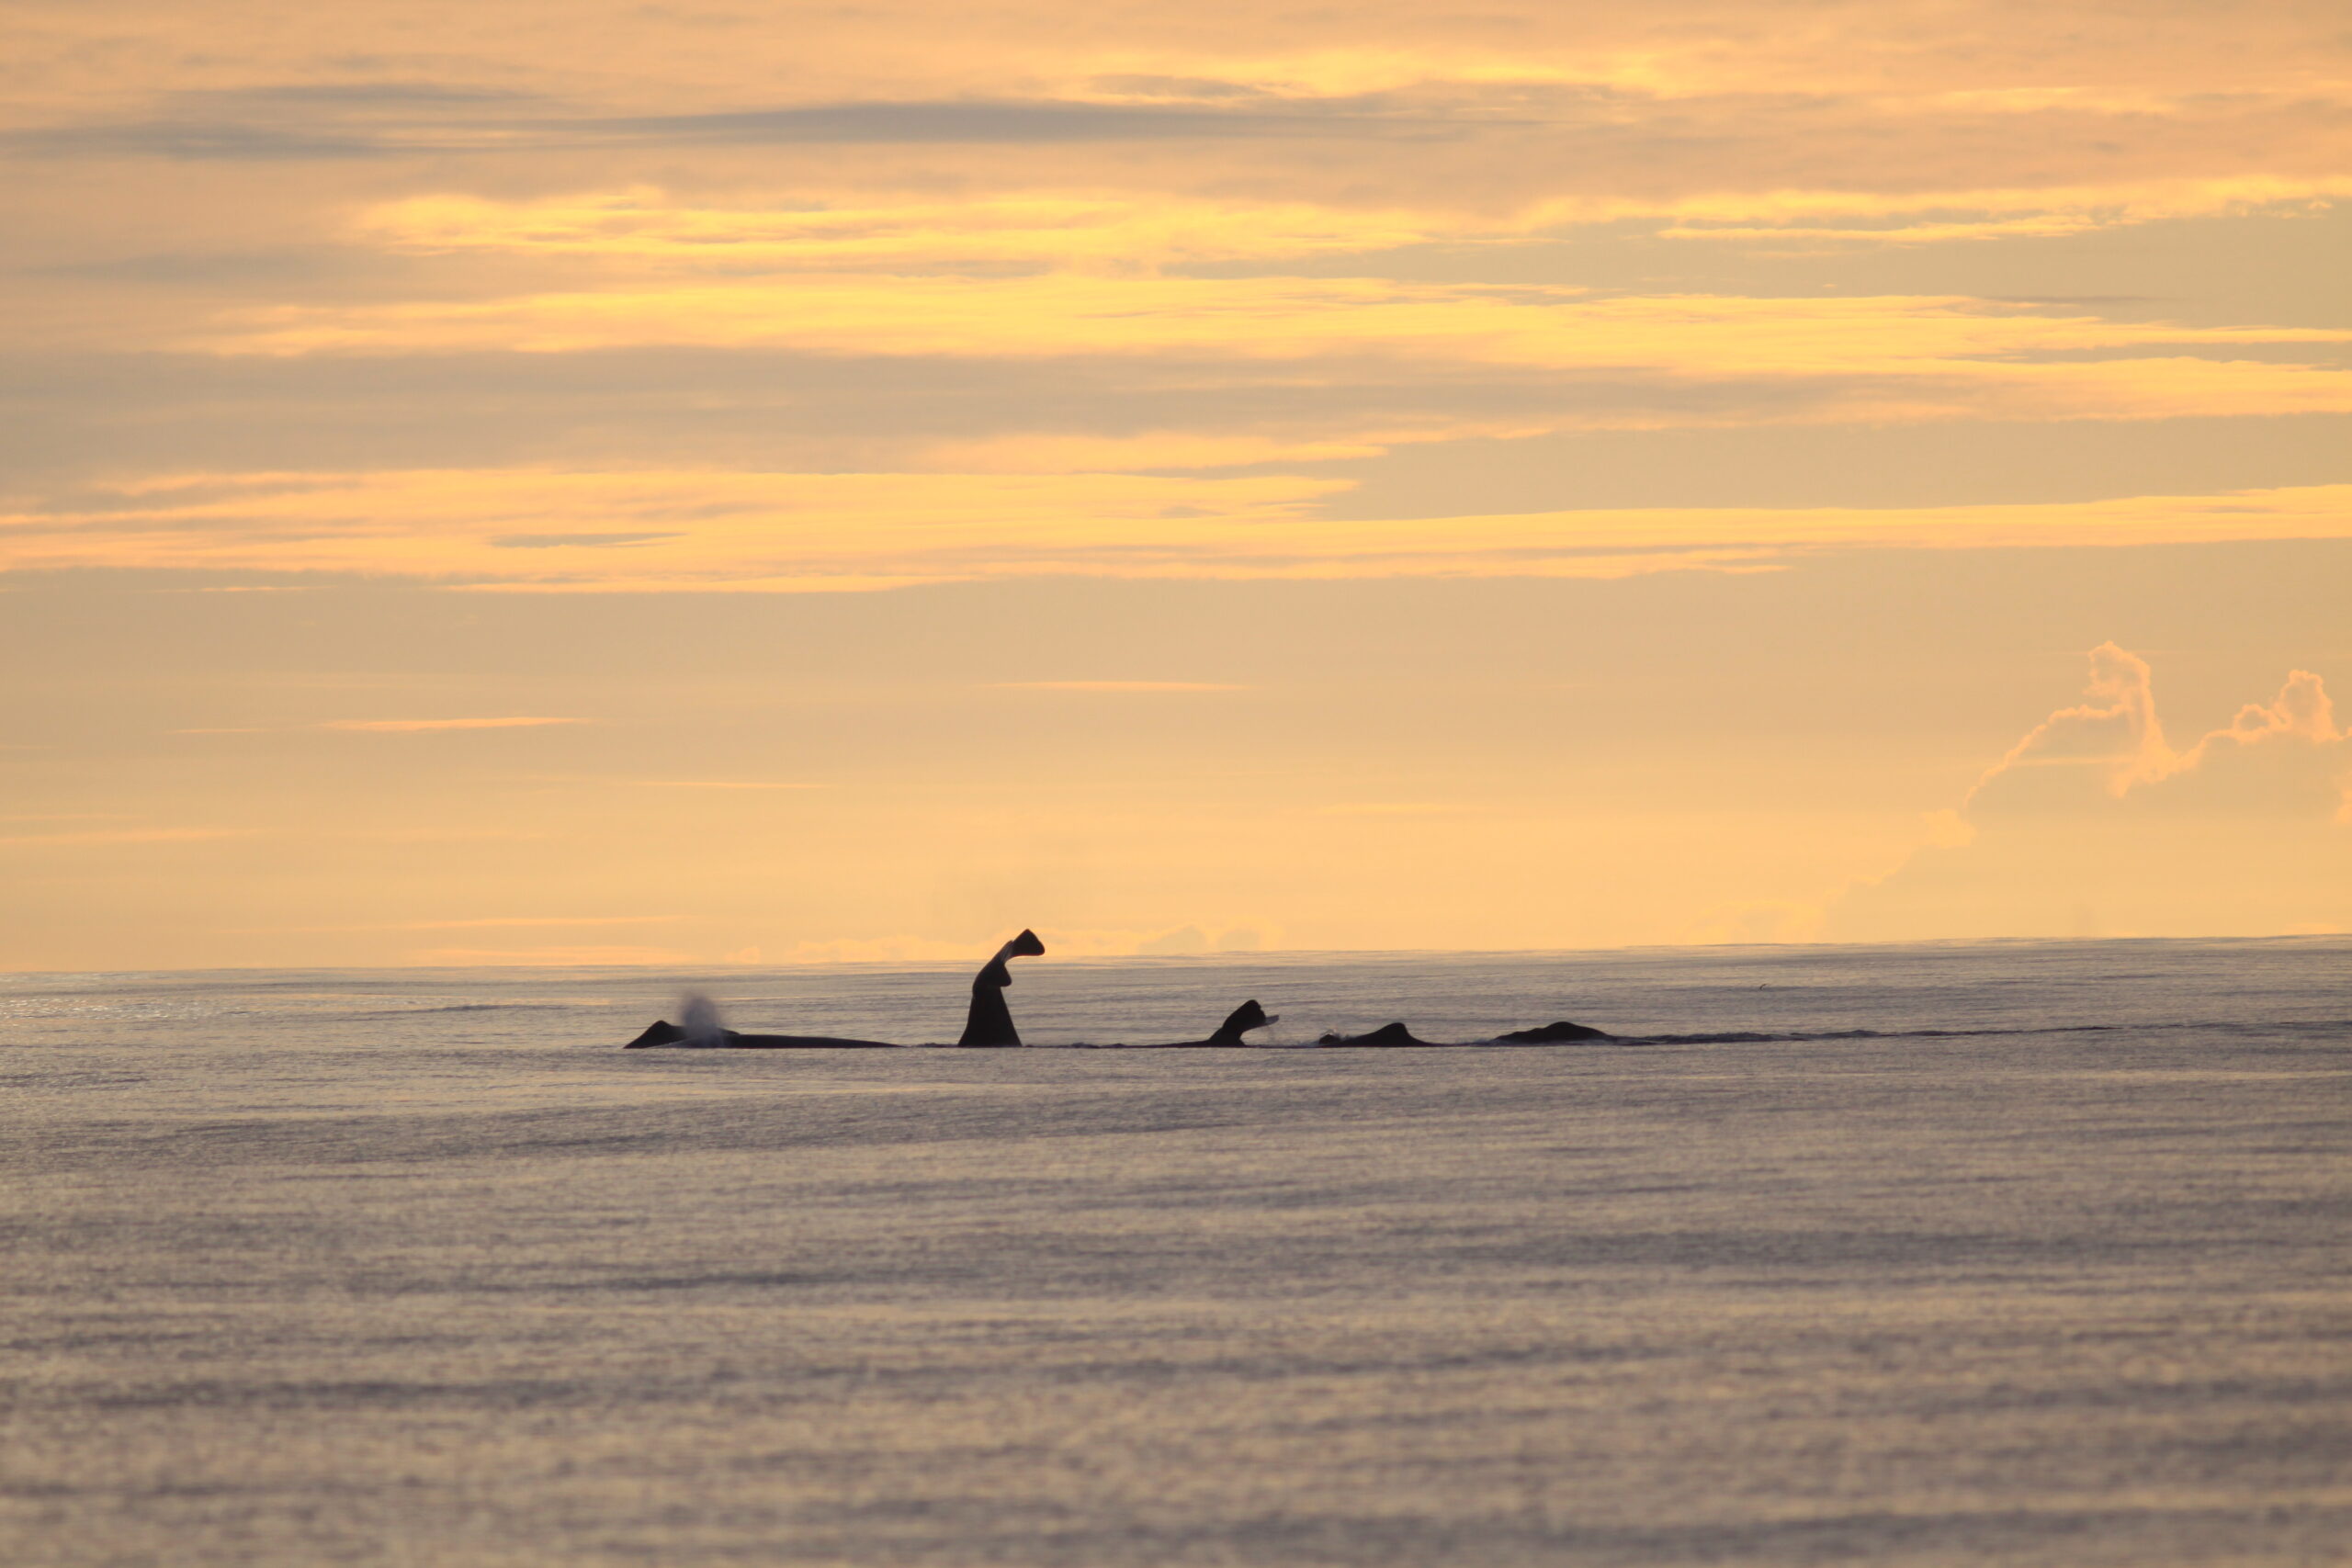 A group of whales putting their tails in the air against a horizon at sunset.